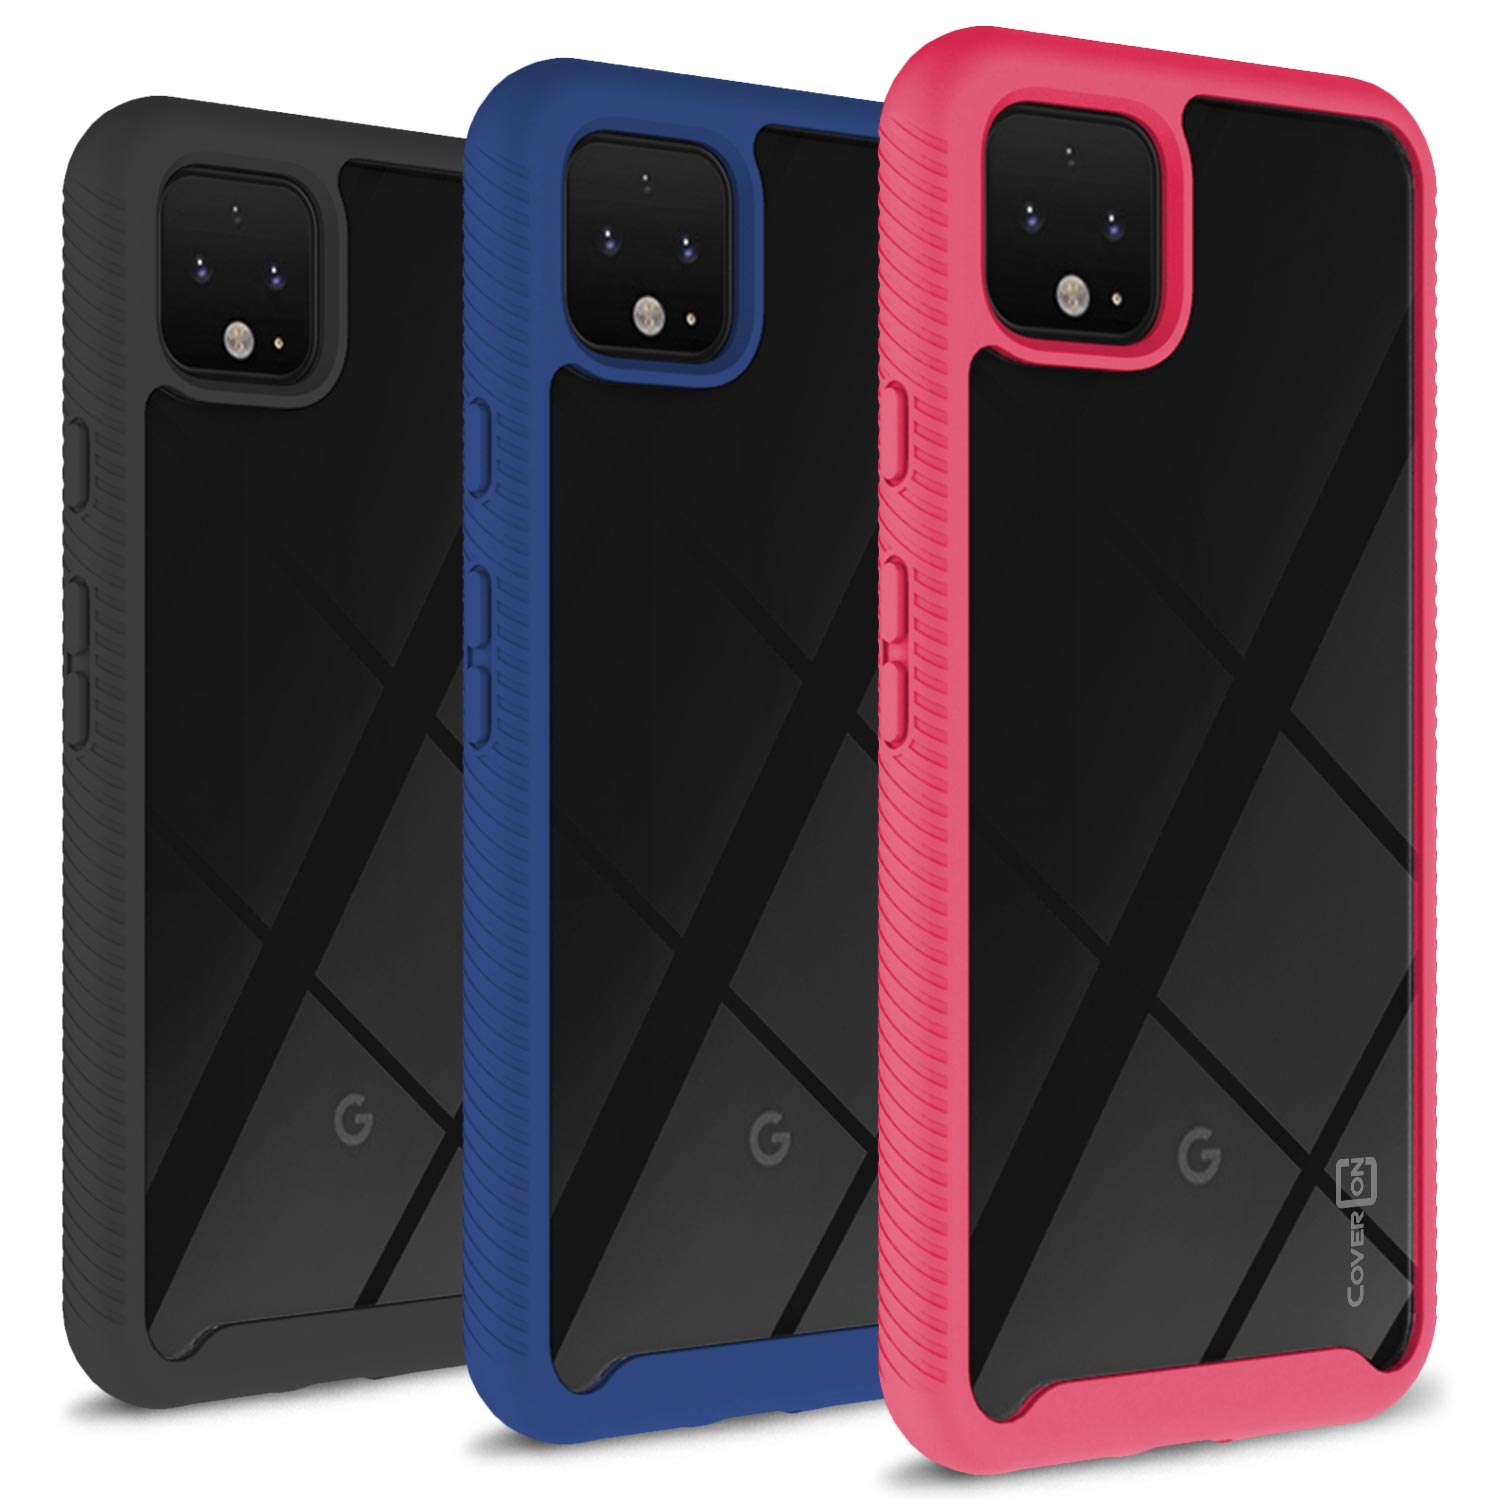 Google Pixel 4 XL Case - Heavy Duty Shockproof Clear Phone Cover - EOS Series